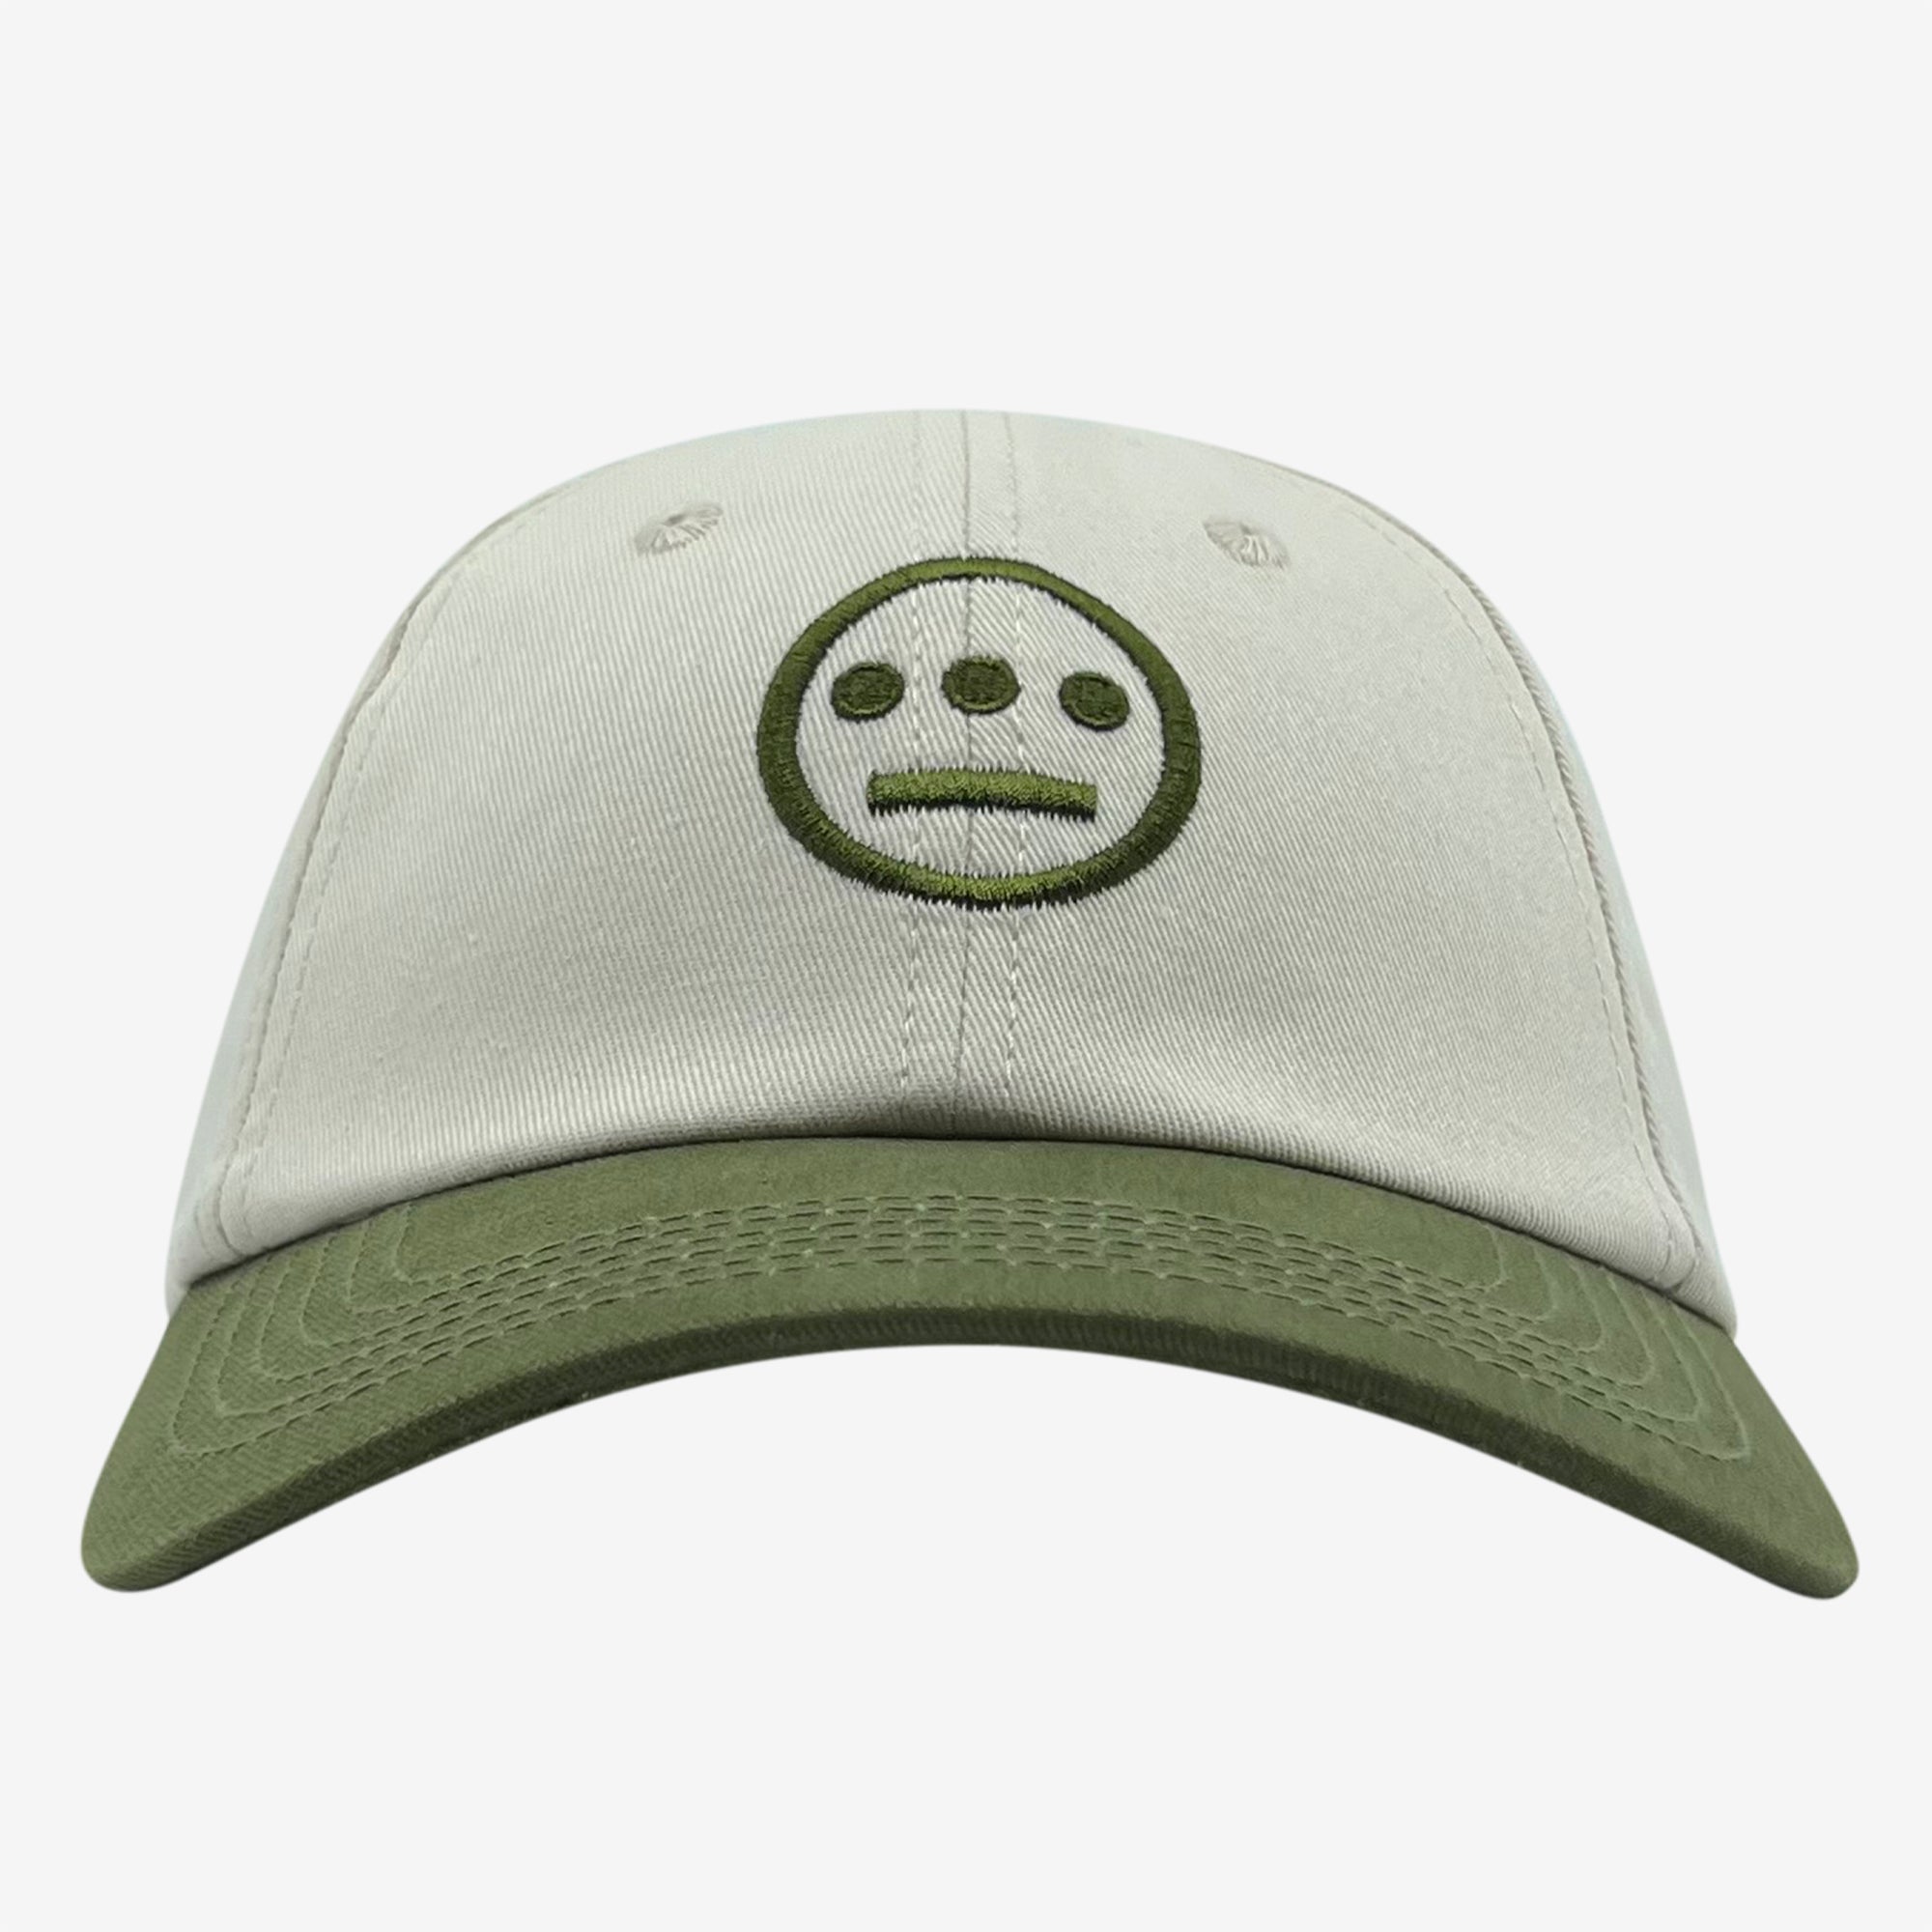 Cream dad hat with olive embroidered Hiero hip-hop crew logo on crown and contrasting olive visor.